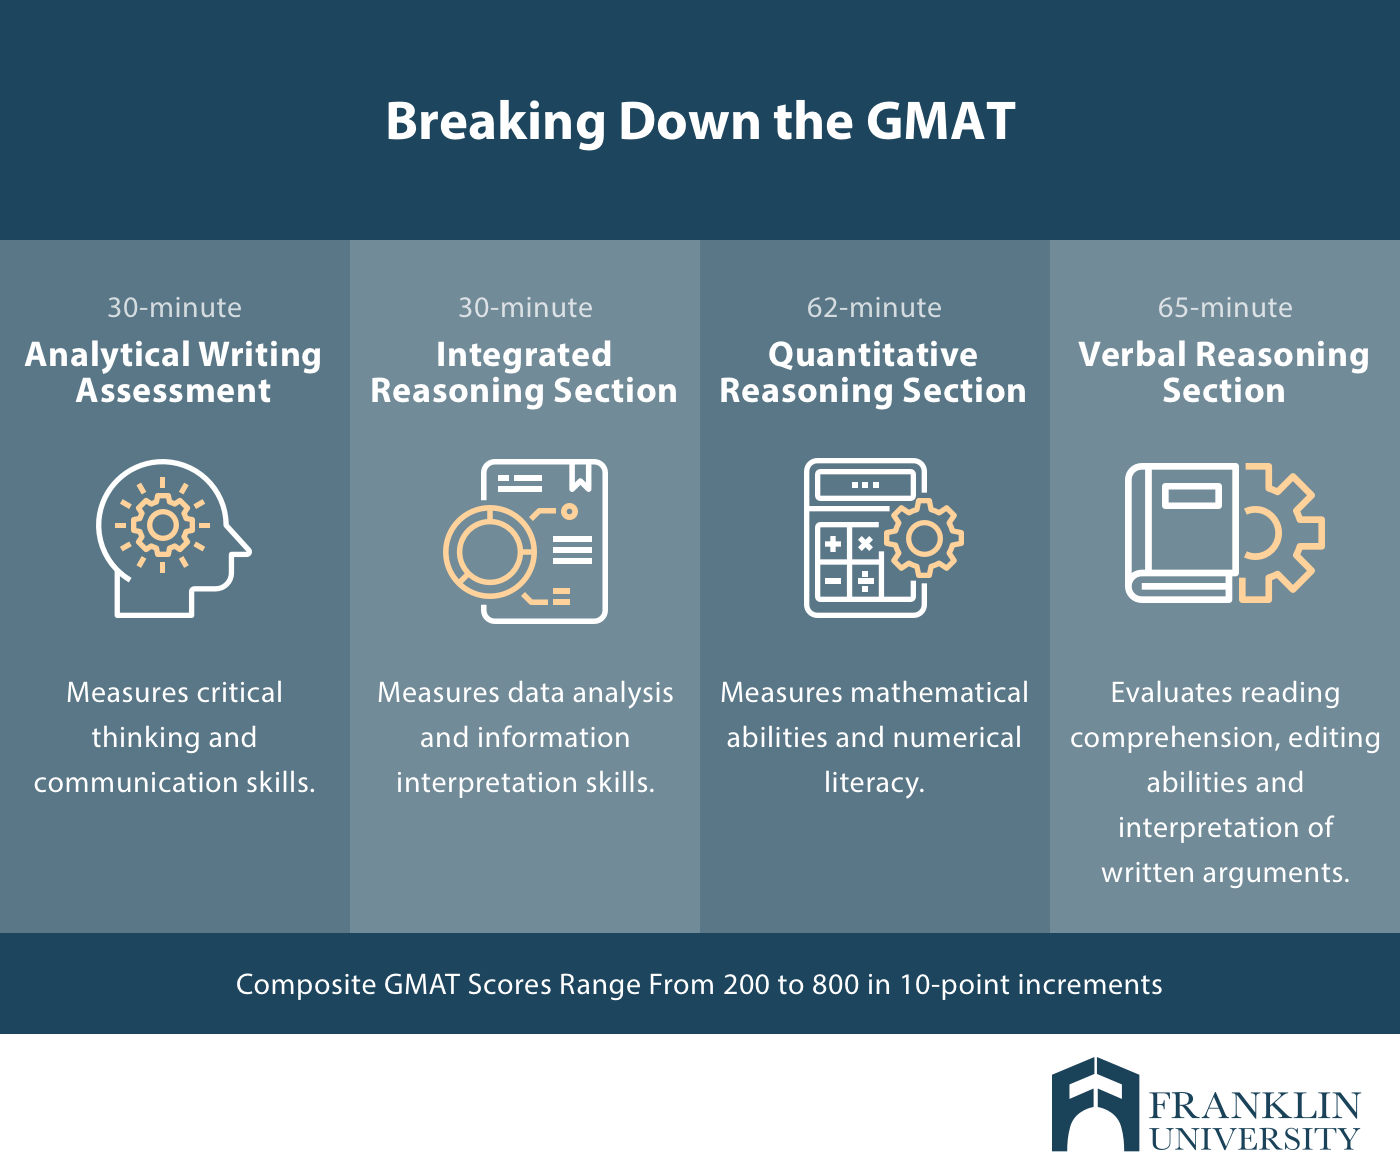 GMAT or GRE For MBA: What Exam Do You Need To Apply?